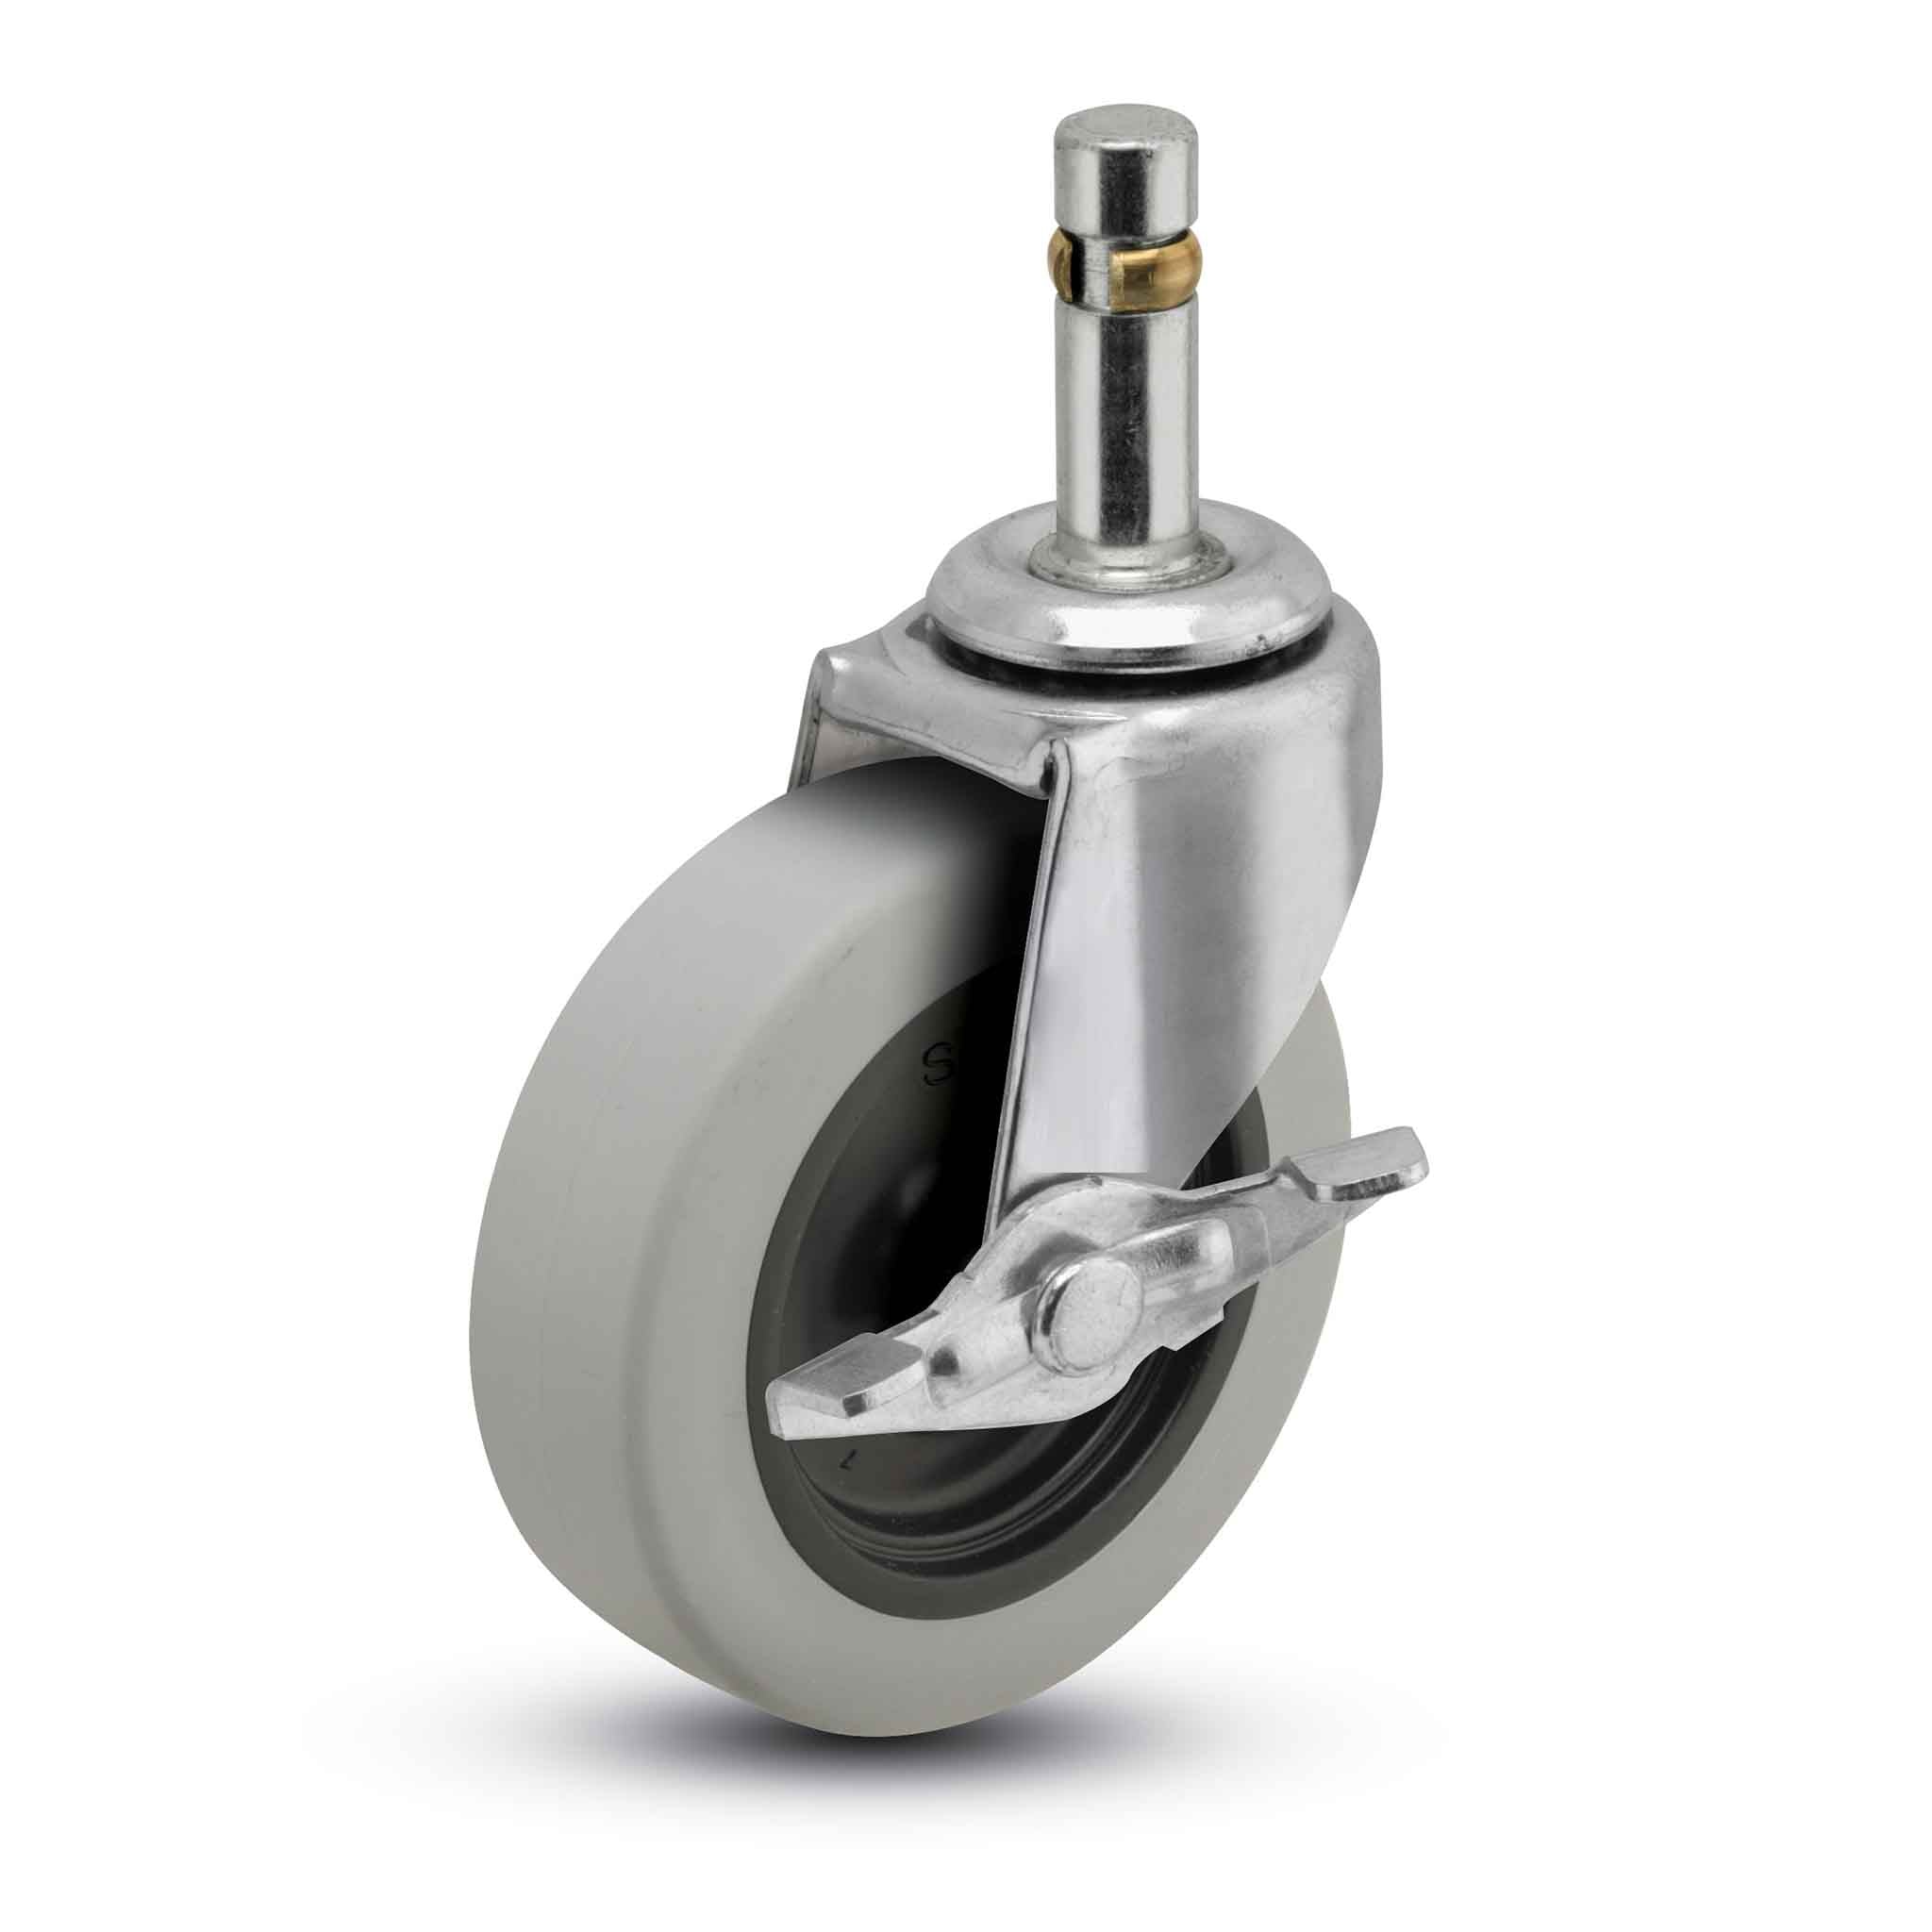 Heavy Duty Locking Casters And Caster Wheels With Brakes